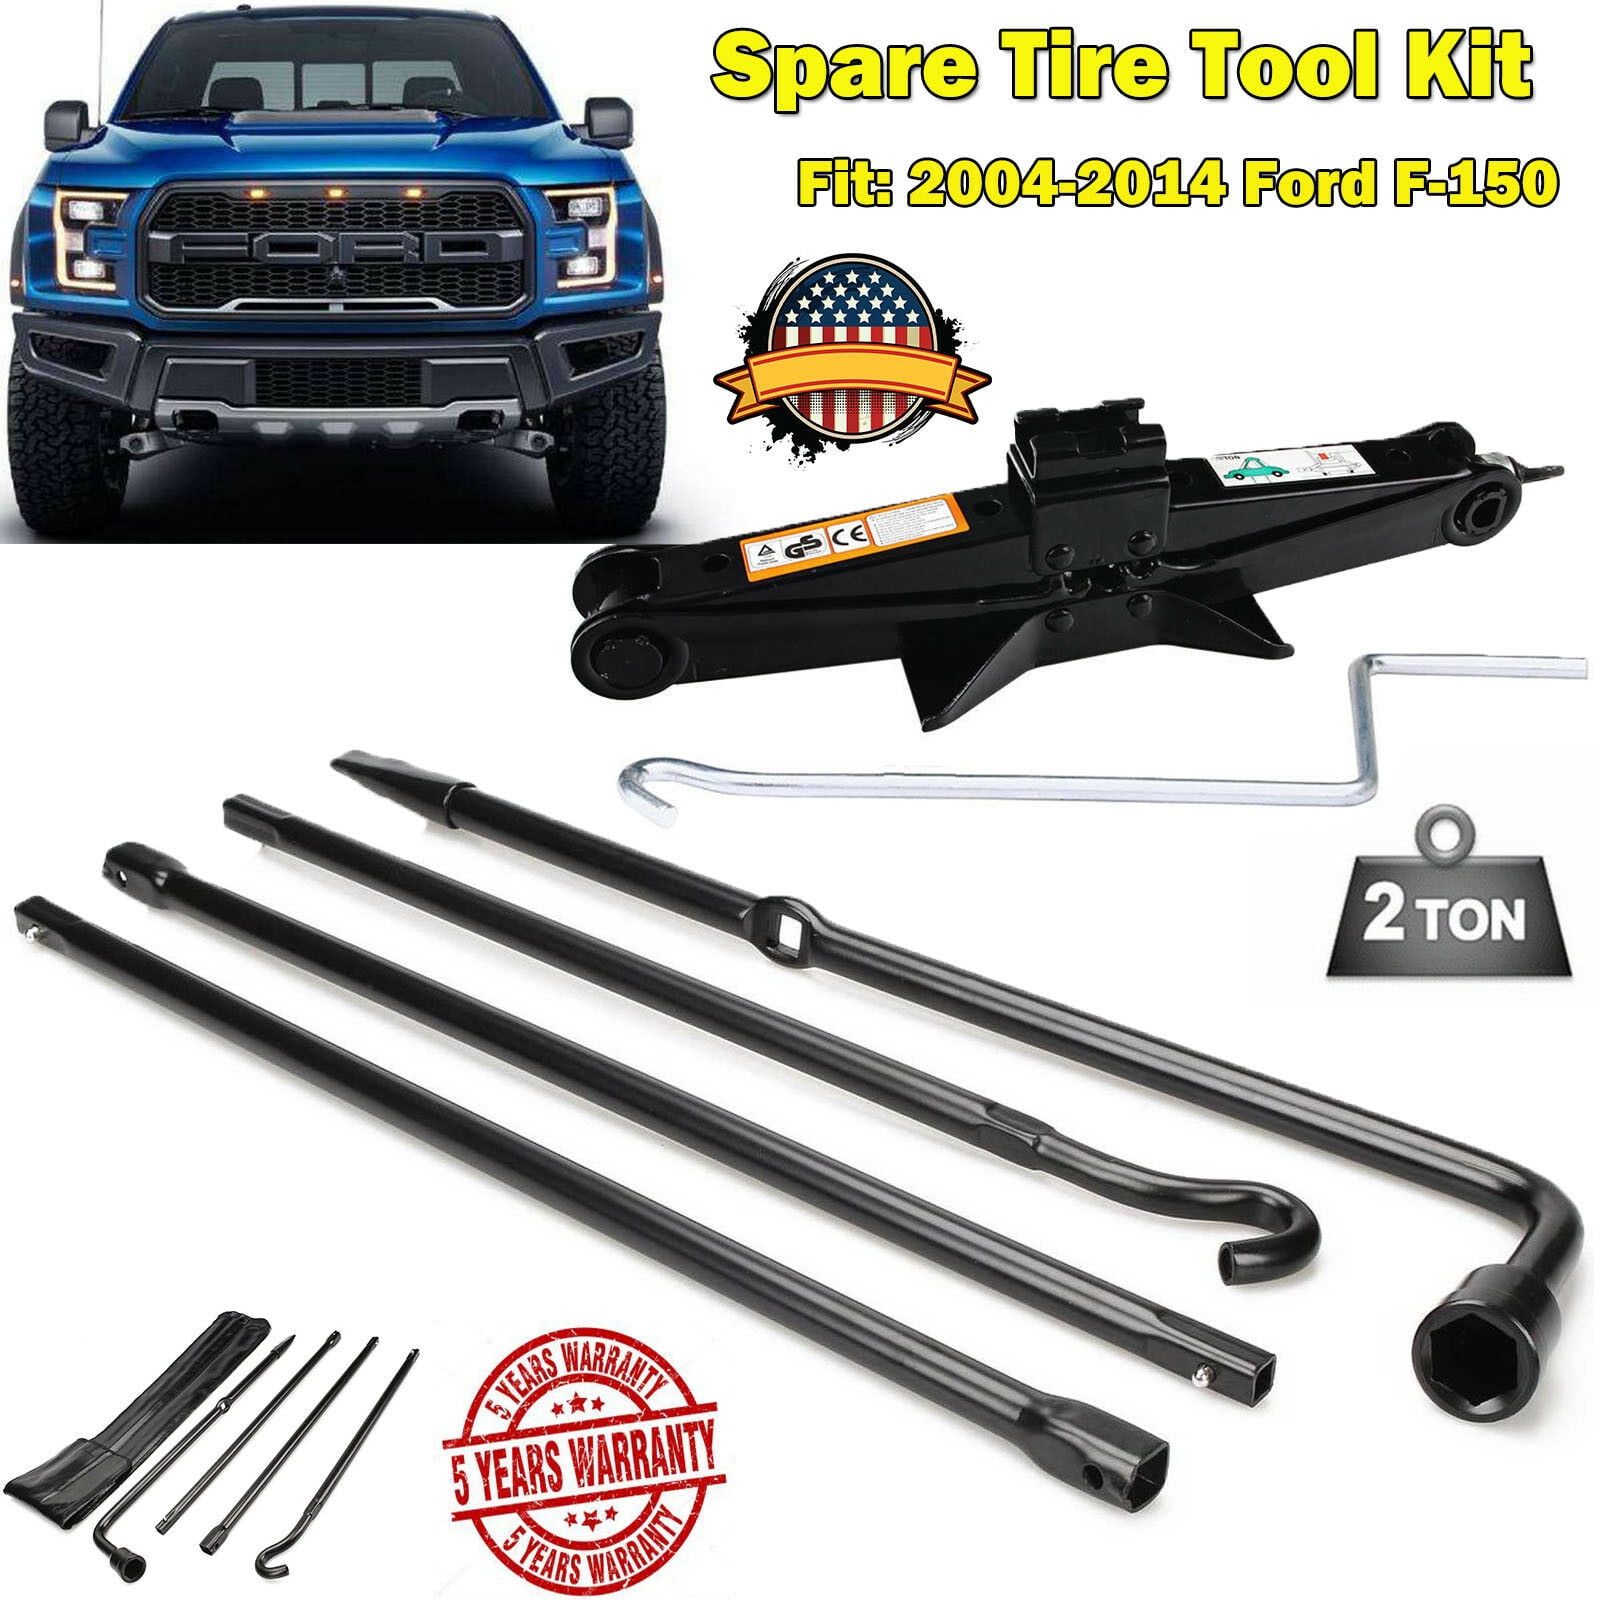 For 2004-2014 Ford F-150 Spare Tire Tool Exension Iron Replacement wScissor Jack 